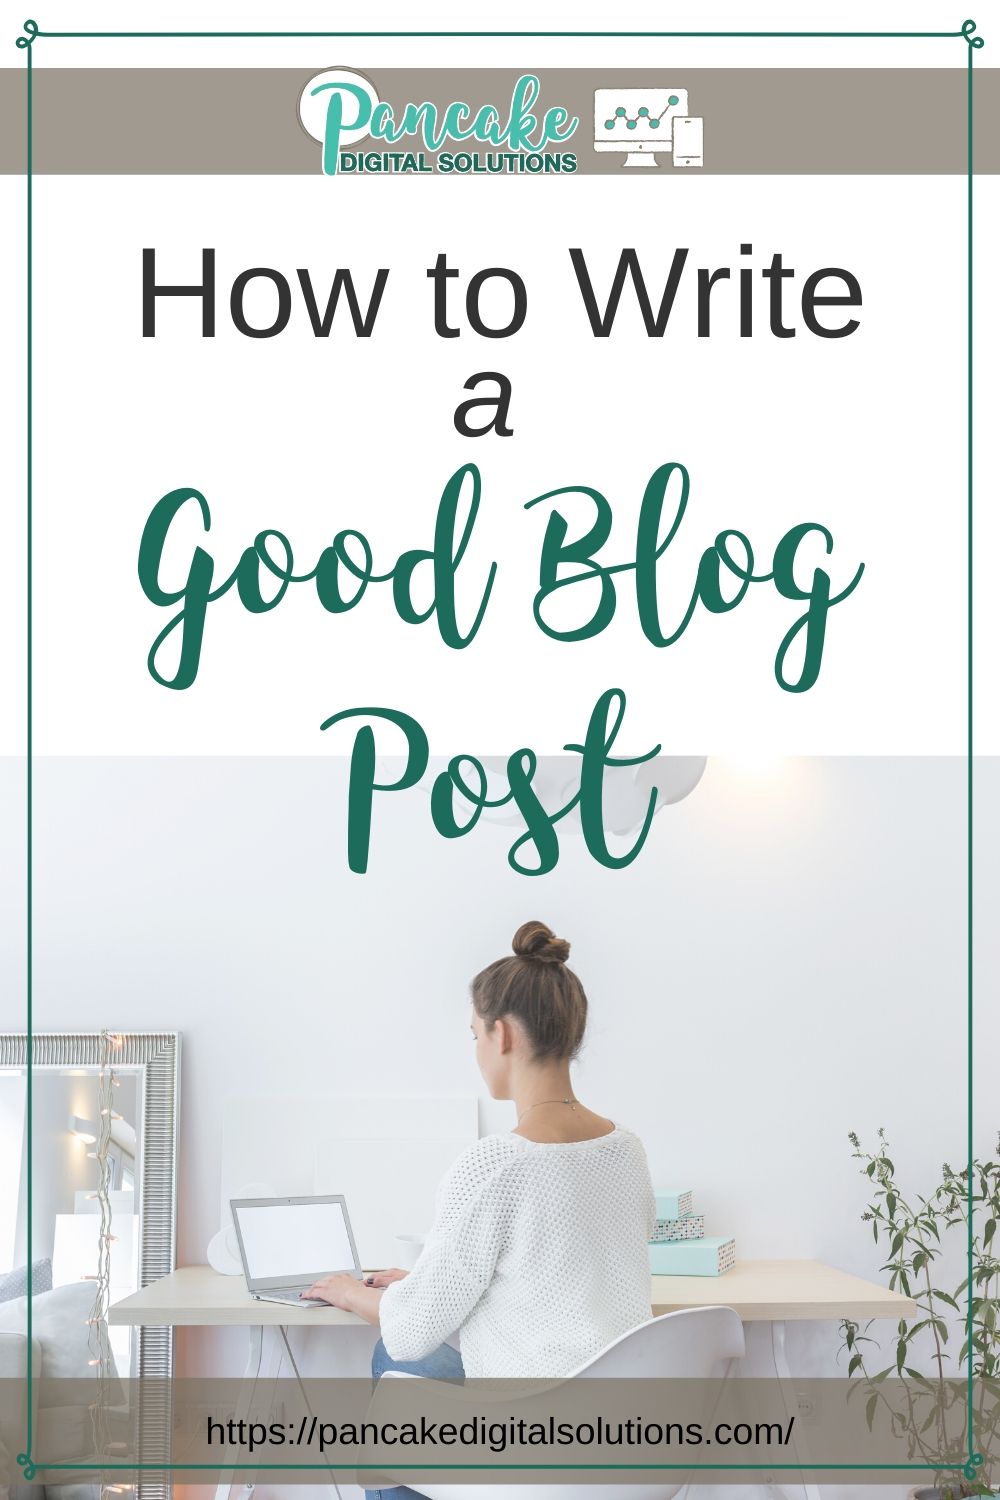 How to Write a Good Blog Post